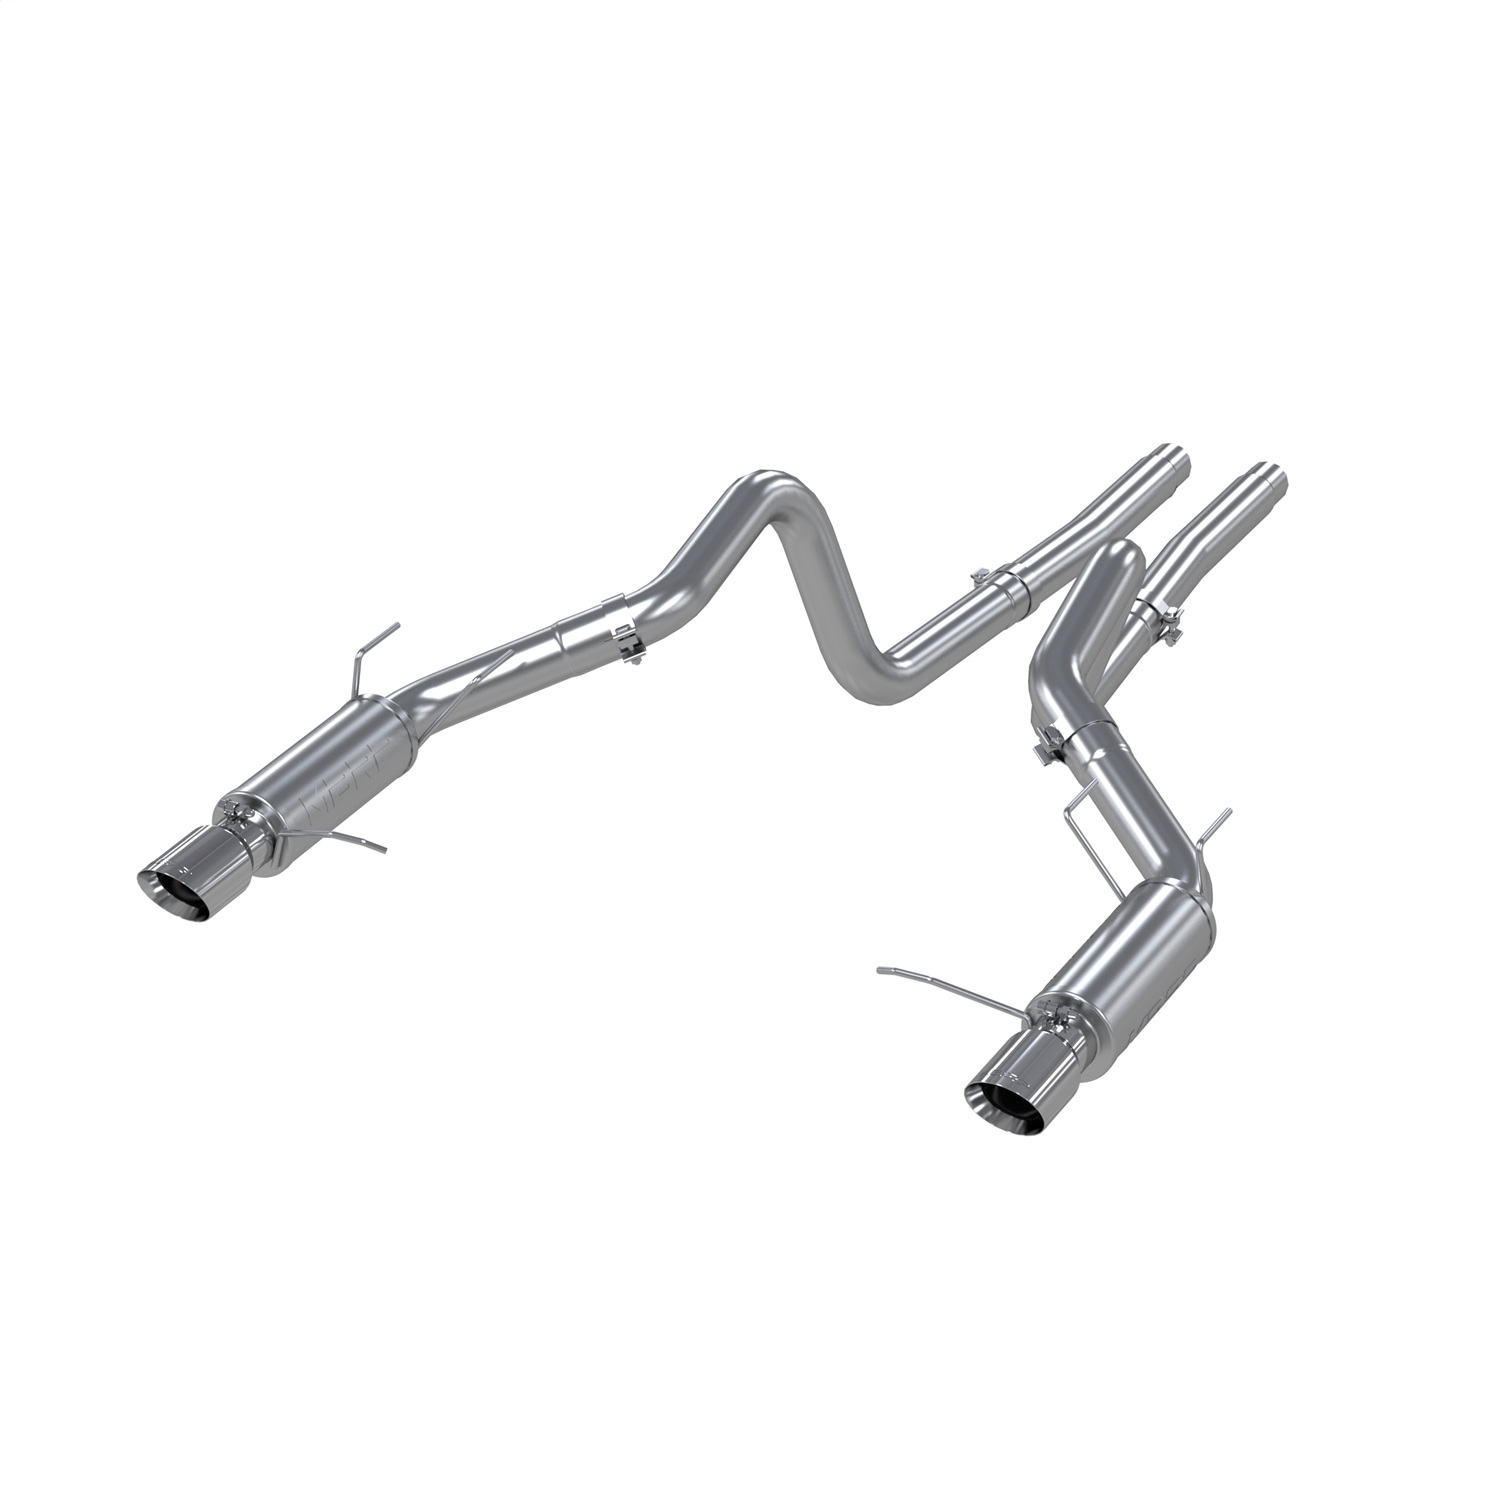 MBRP Exhaust S7264409 Armor Plus Cat Back Exhaust System Fits 11-14 Mustang